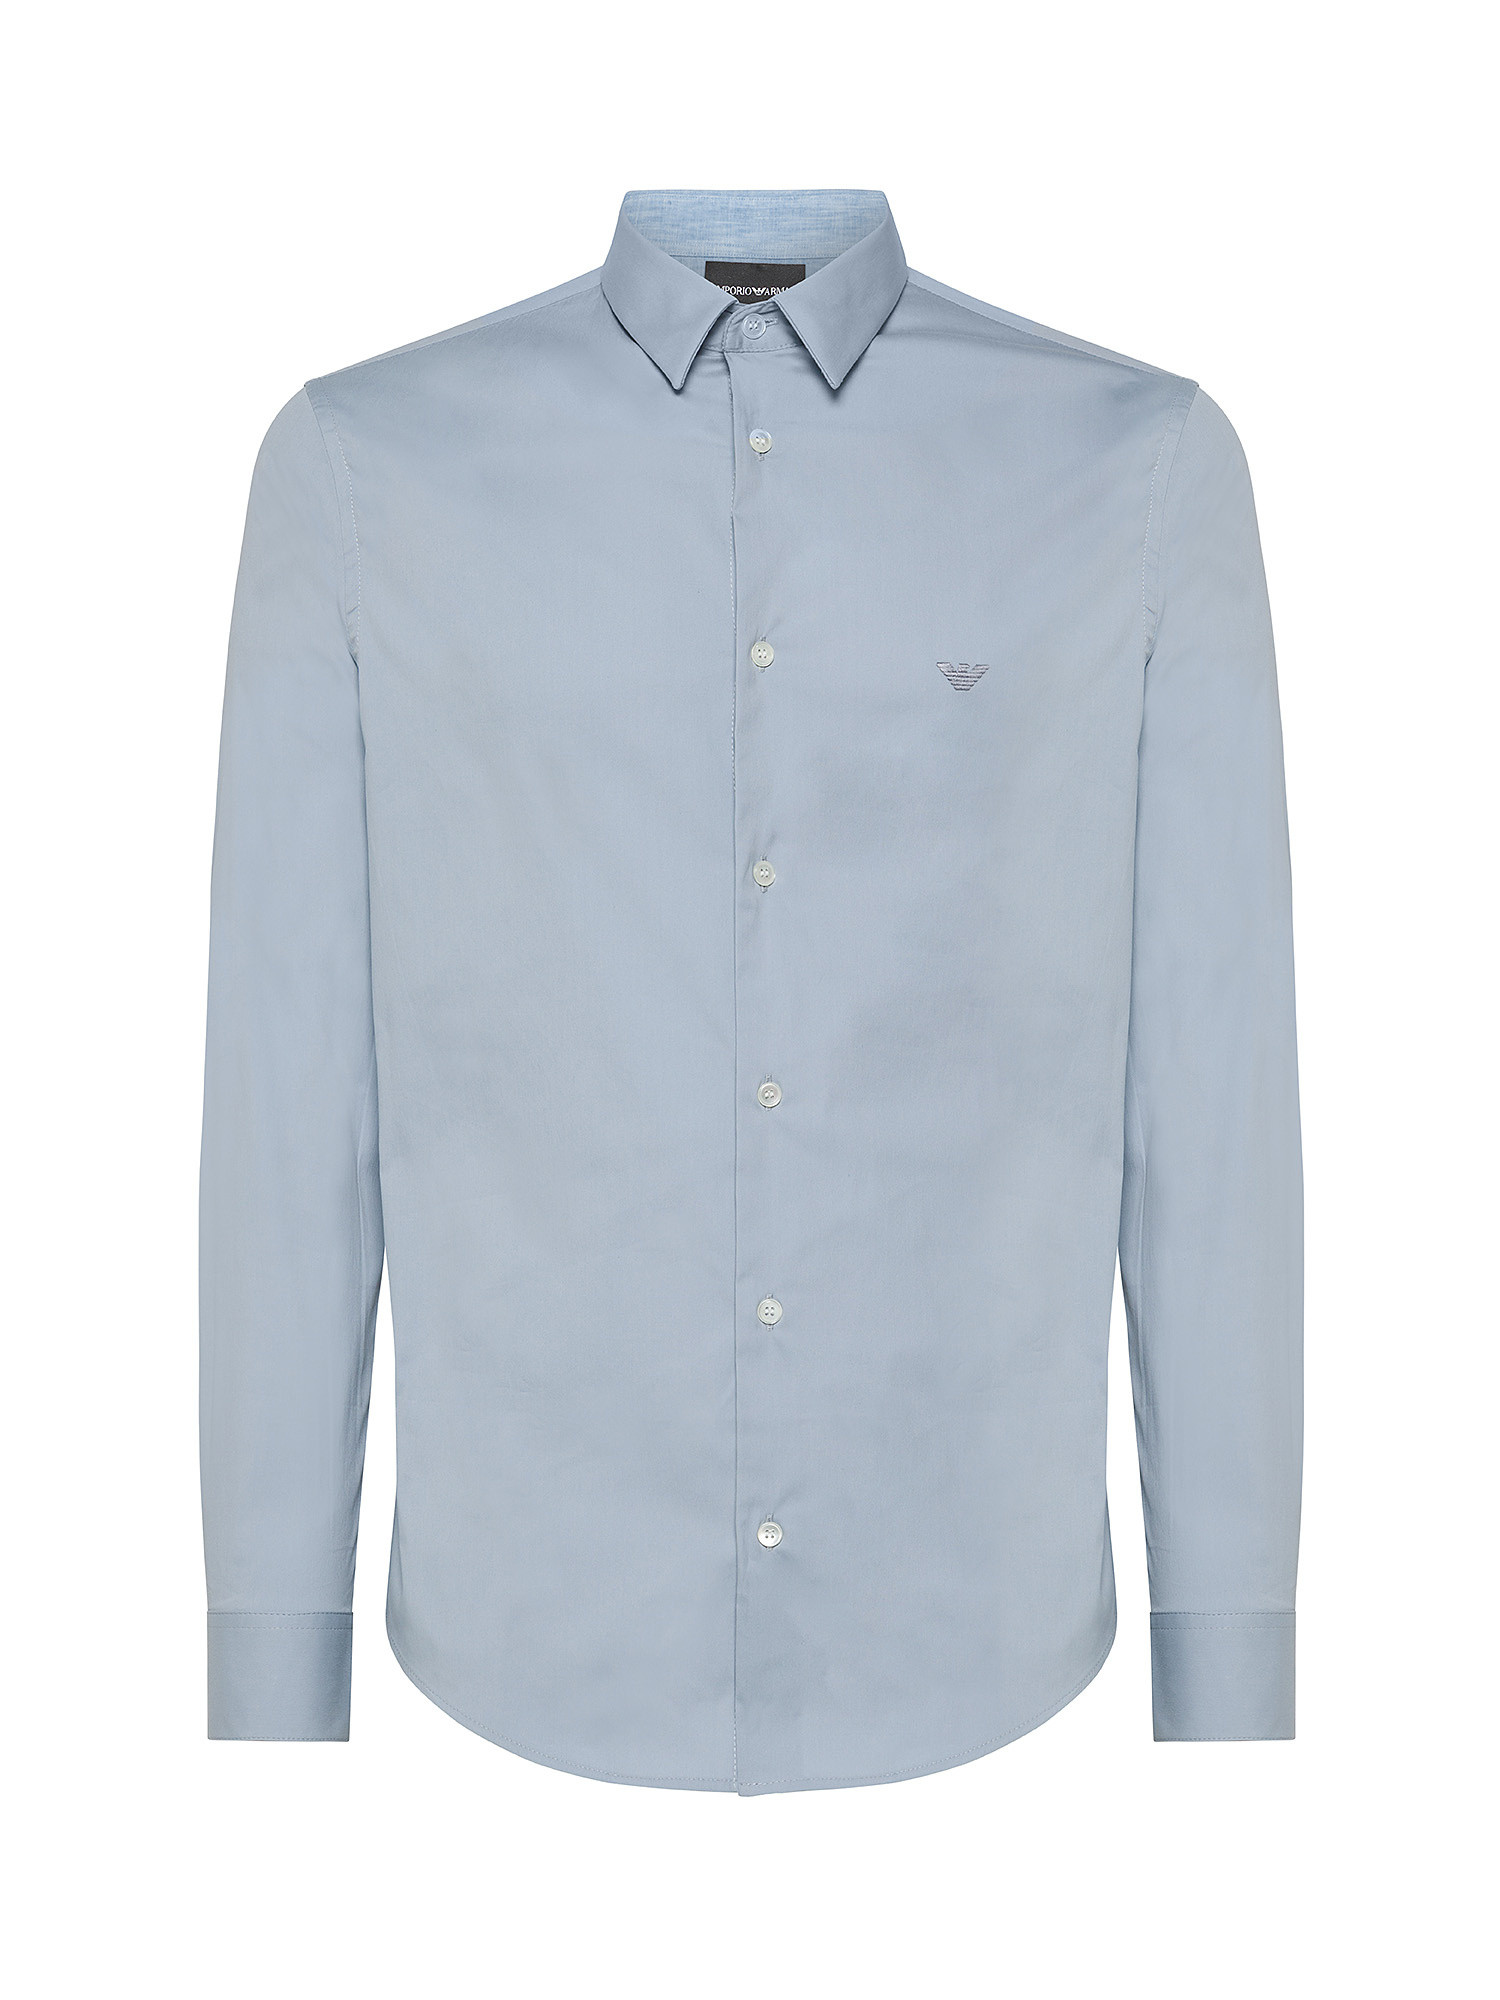 Emporio Armani - Shirt with embroidered logo, Light Blue, large image number 1